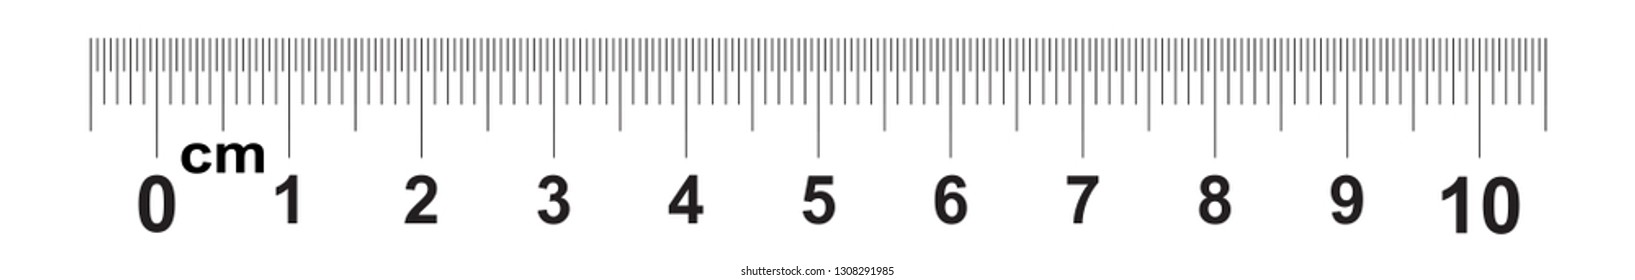 Detail Picture Of A Centimeter Ruler Nomer 10